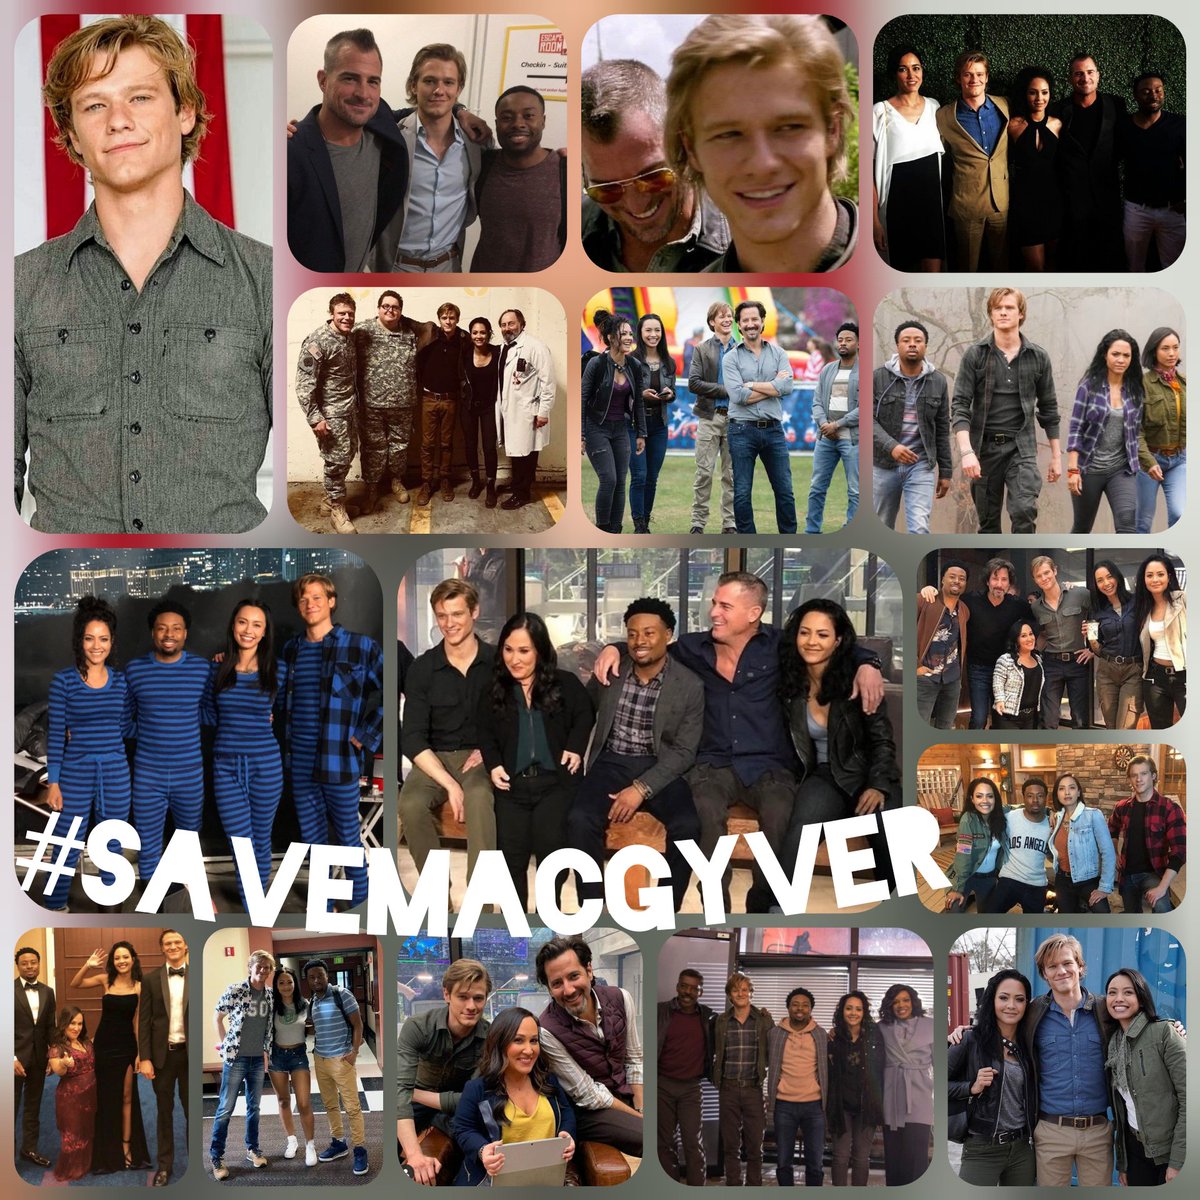 @CBSTVStudios @FireCountryCBS @StarTrekOnPPlus @StarTrek @GhostsCBS @NCIS_CBS Me and my work besties counting down to the day MacGyver is saved!!!
#SaveMacGyver #WeWantMacGyver